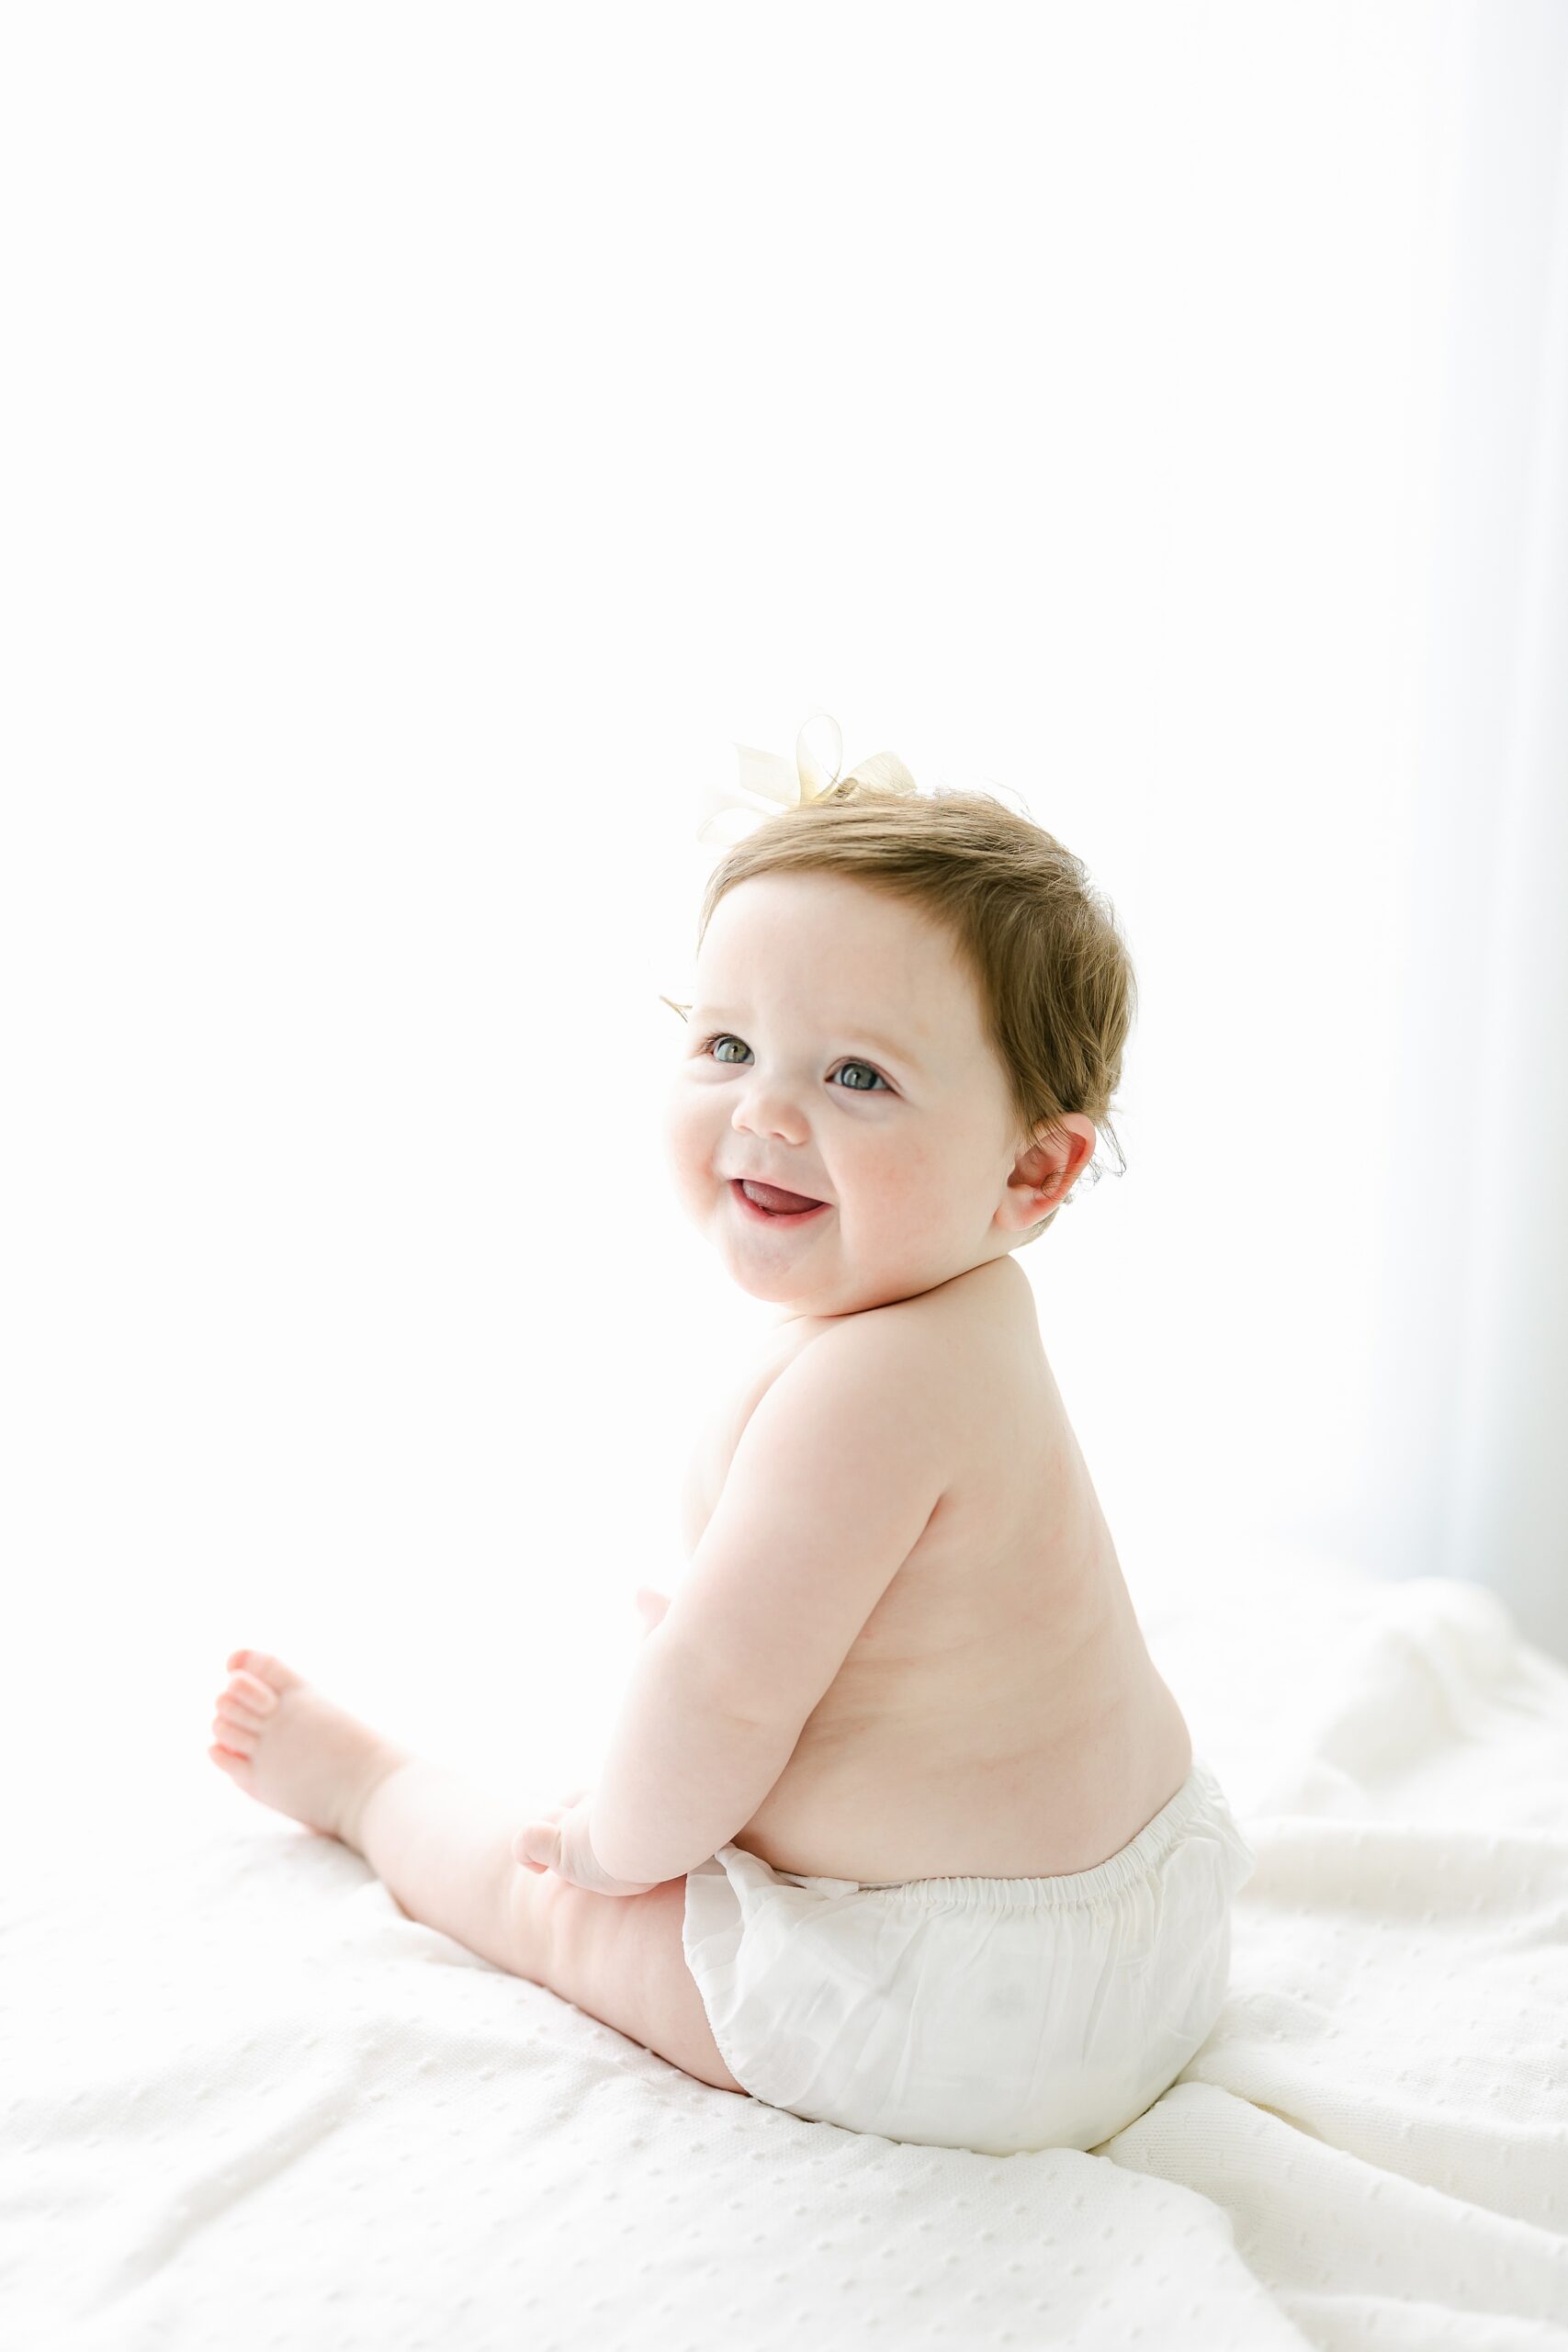 A happy infant sits on a bed under a bright window smiling after visiting a pediatric chiropractors in Indianapolis